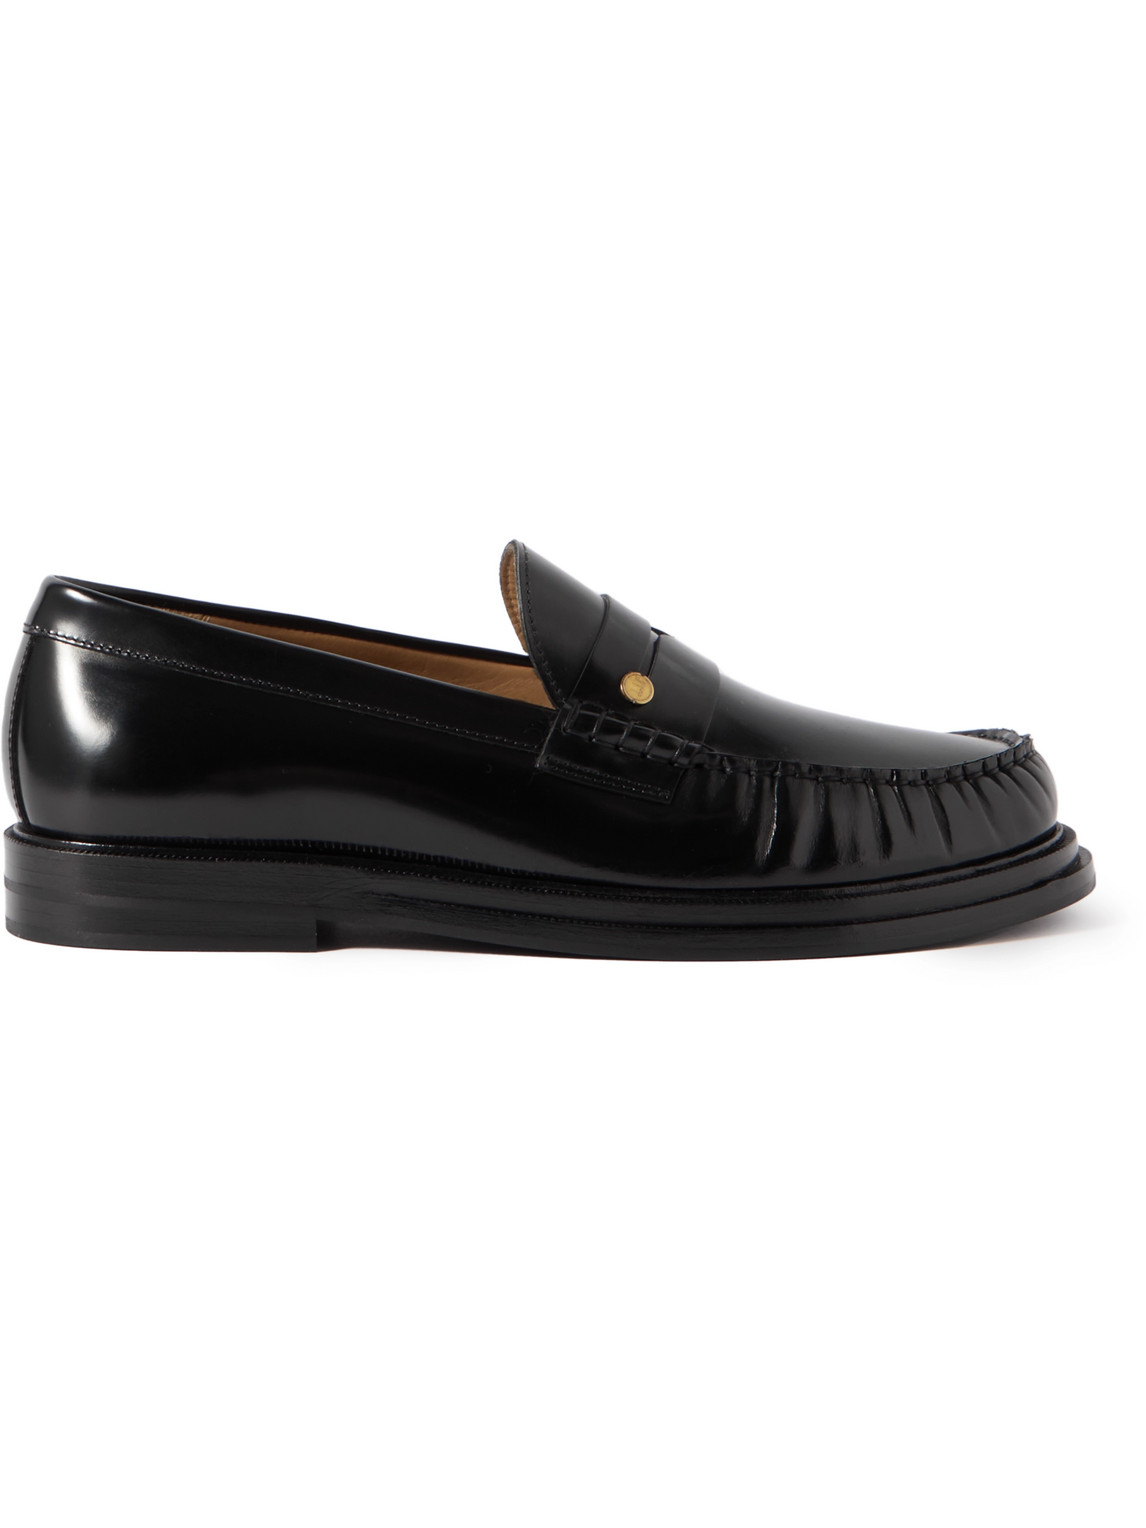 DUNHILL RIVET LEATHER PENNY LOAFERS